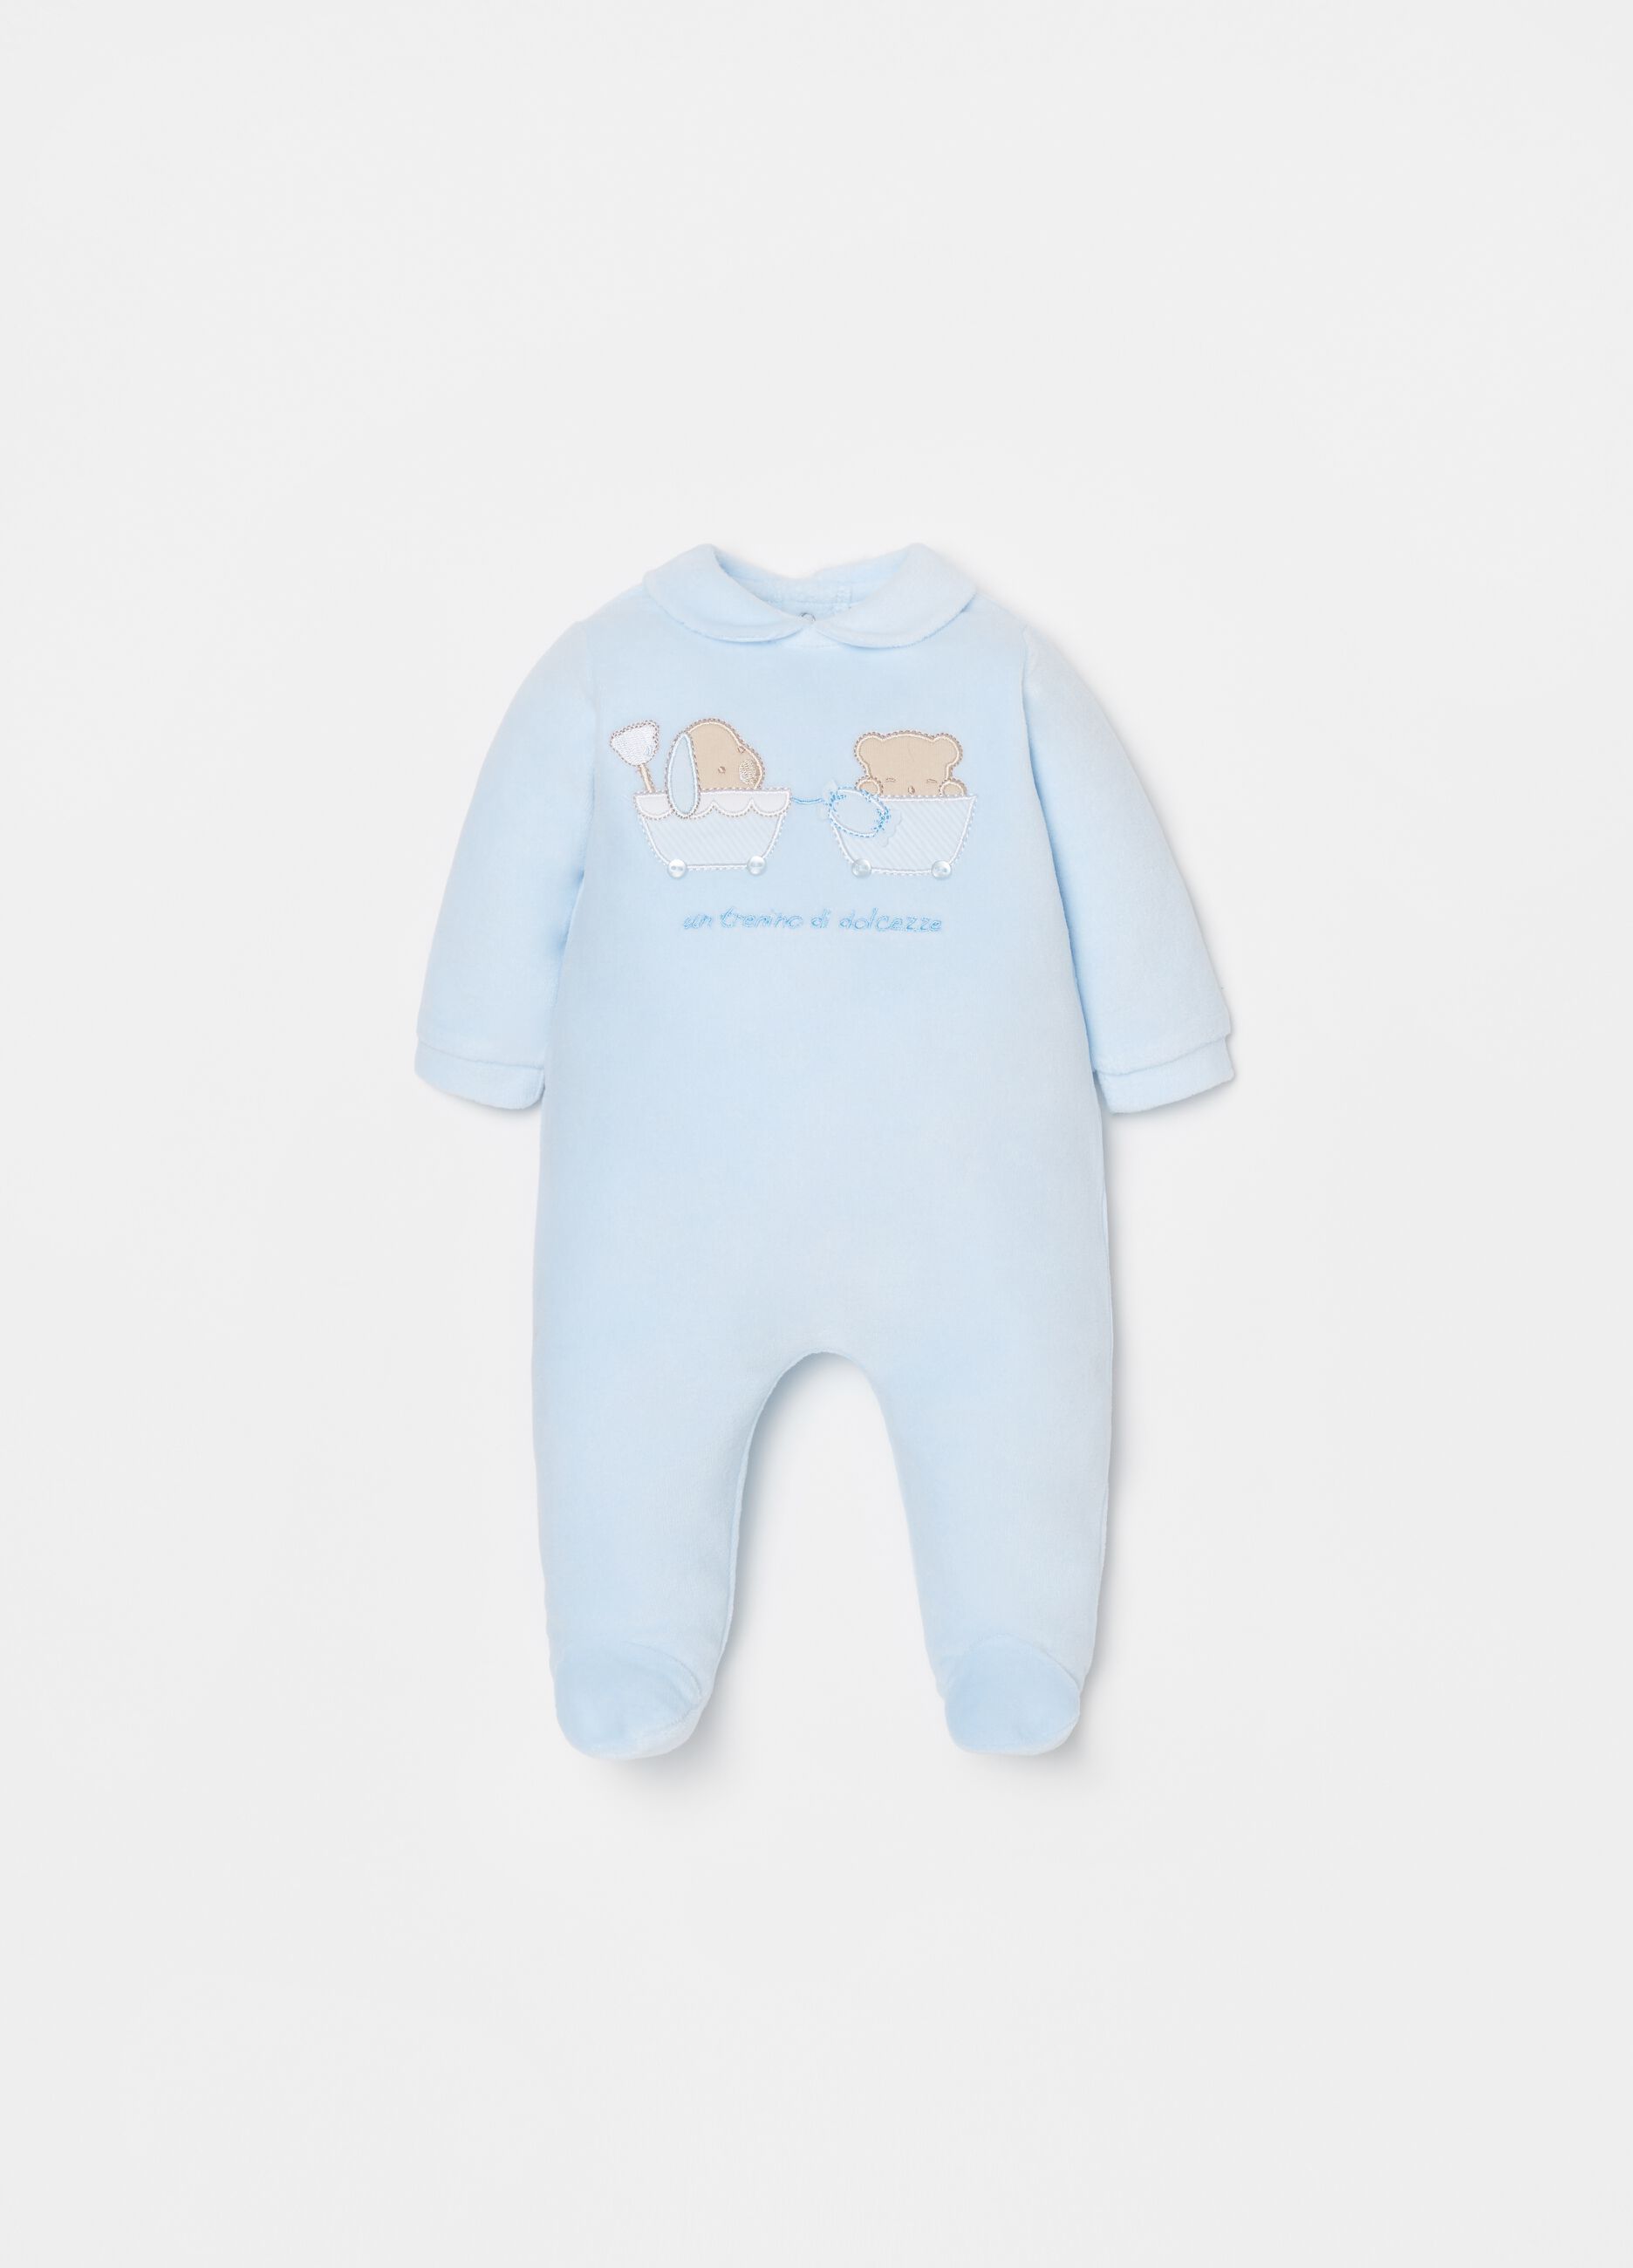 Onesie with long sleeves and embroidery